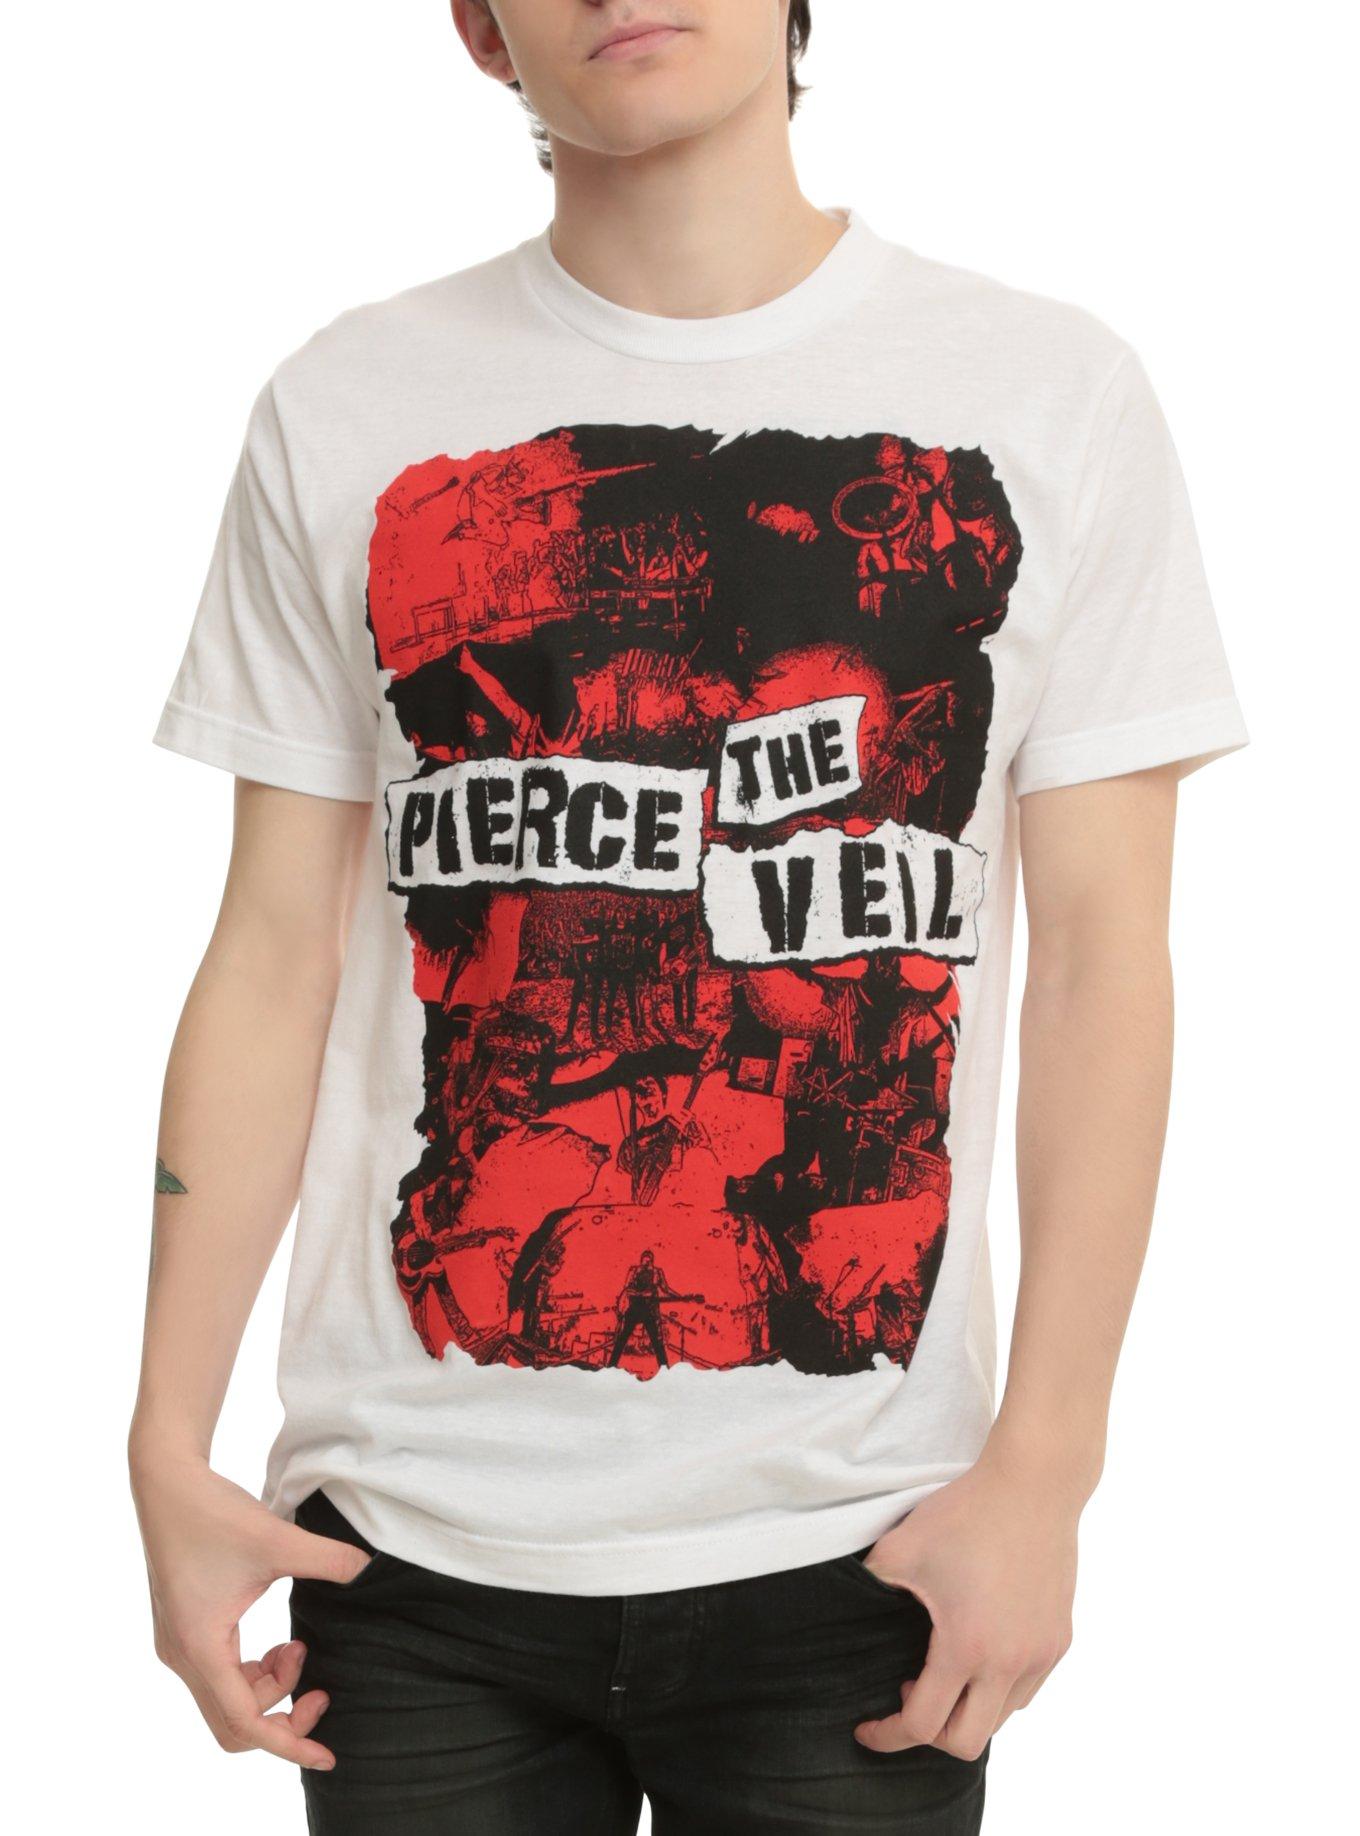 Pierce The Veil Red Collage T-Shirt, WHITE, hi-res